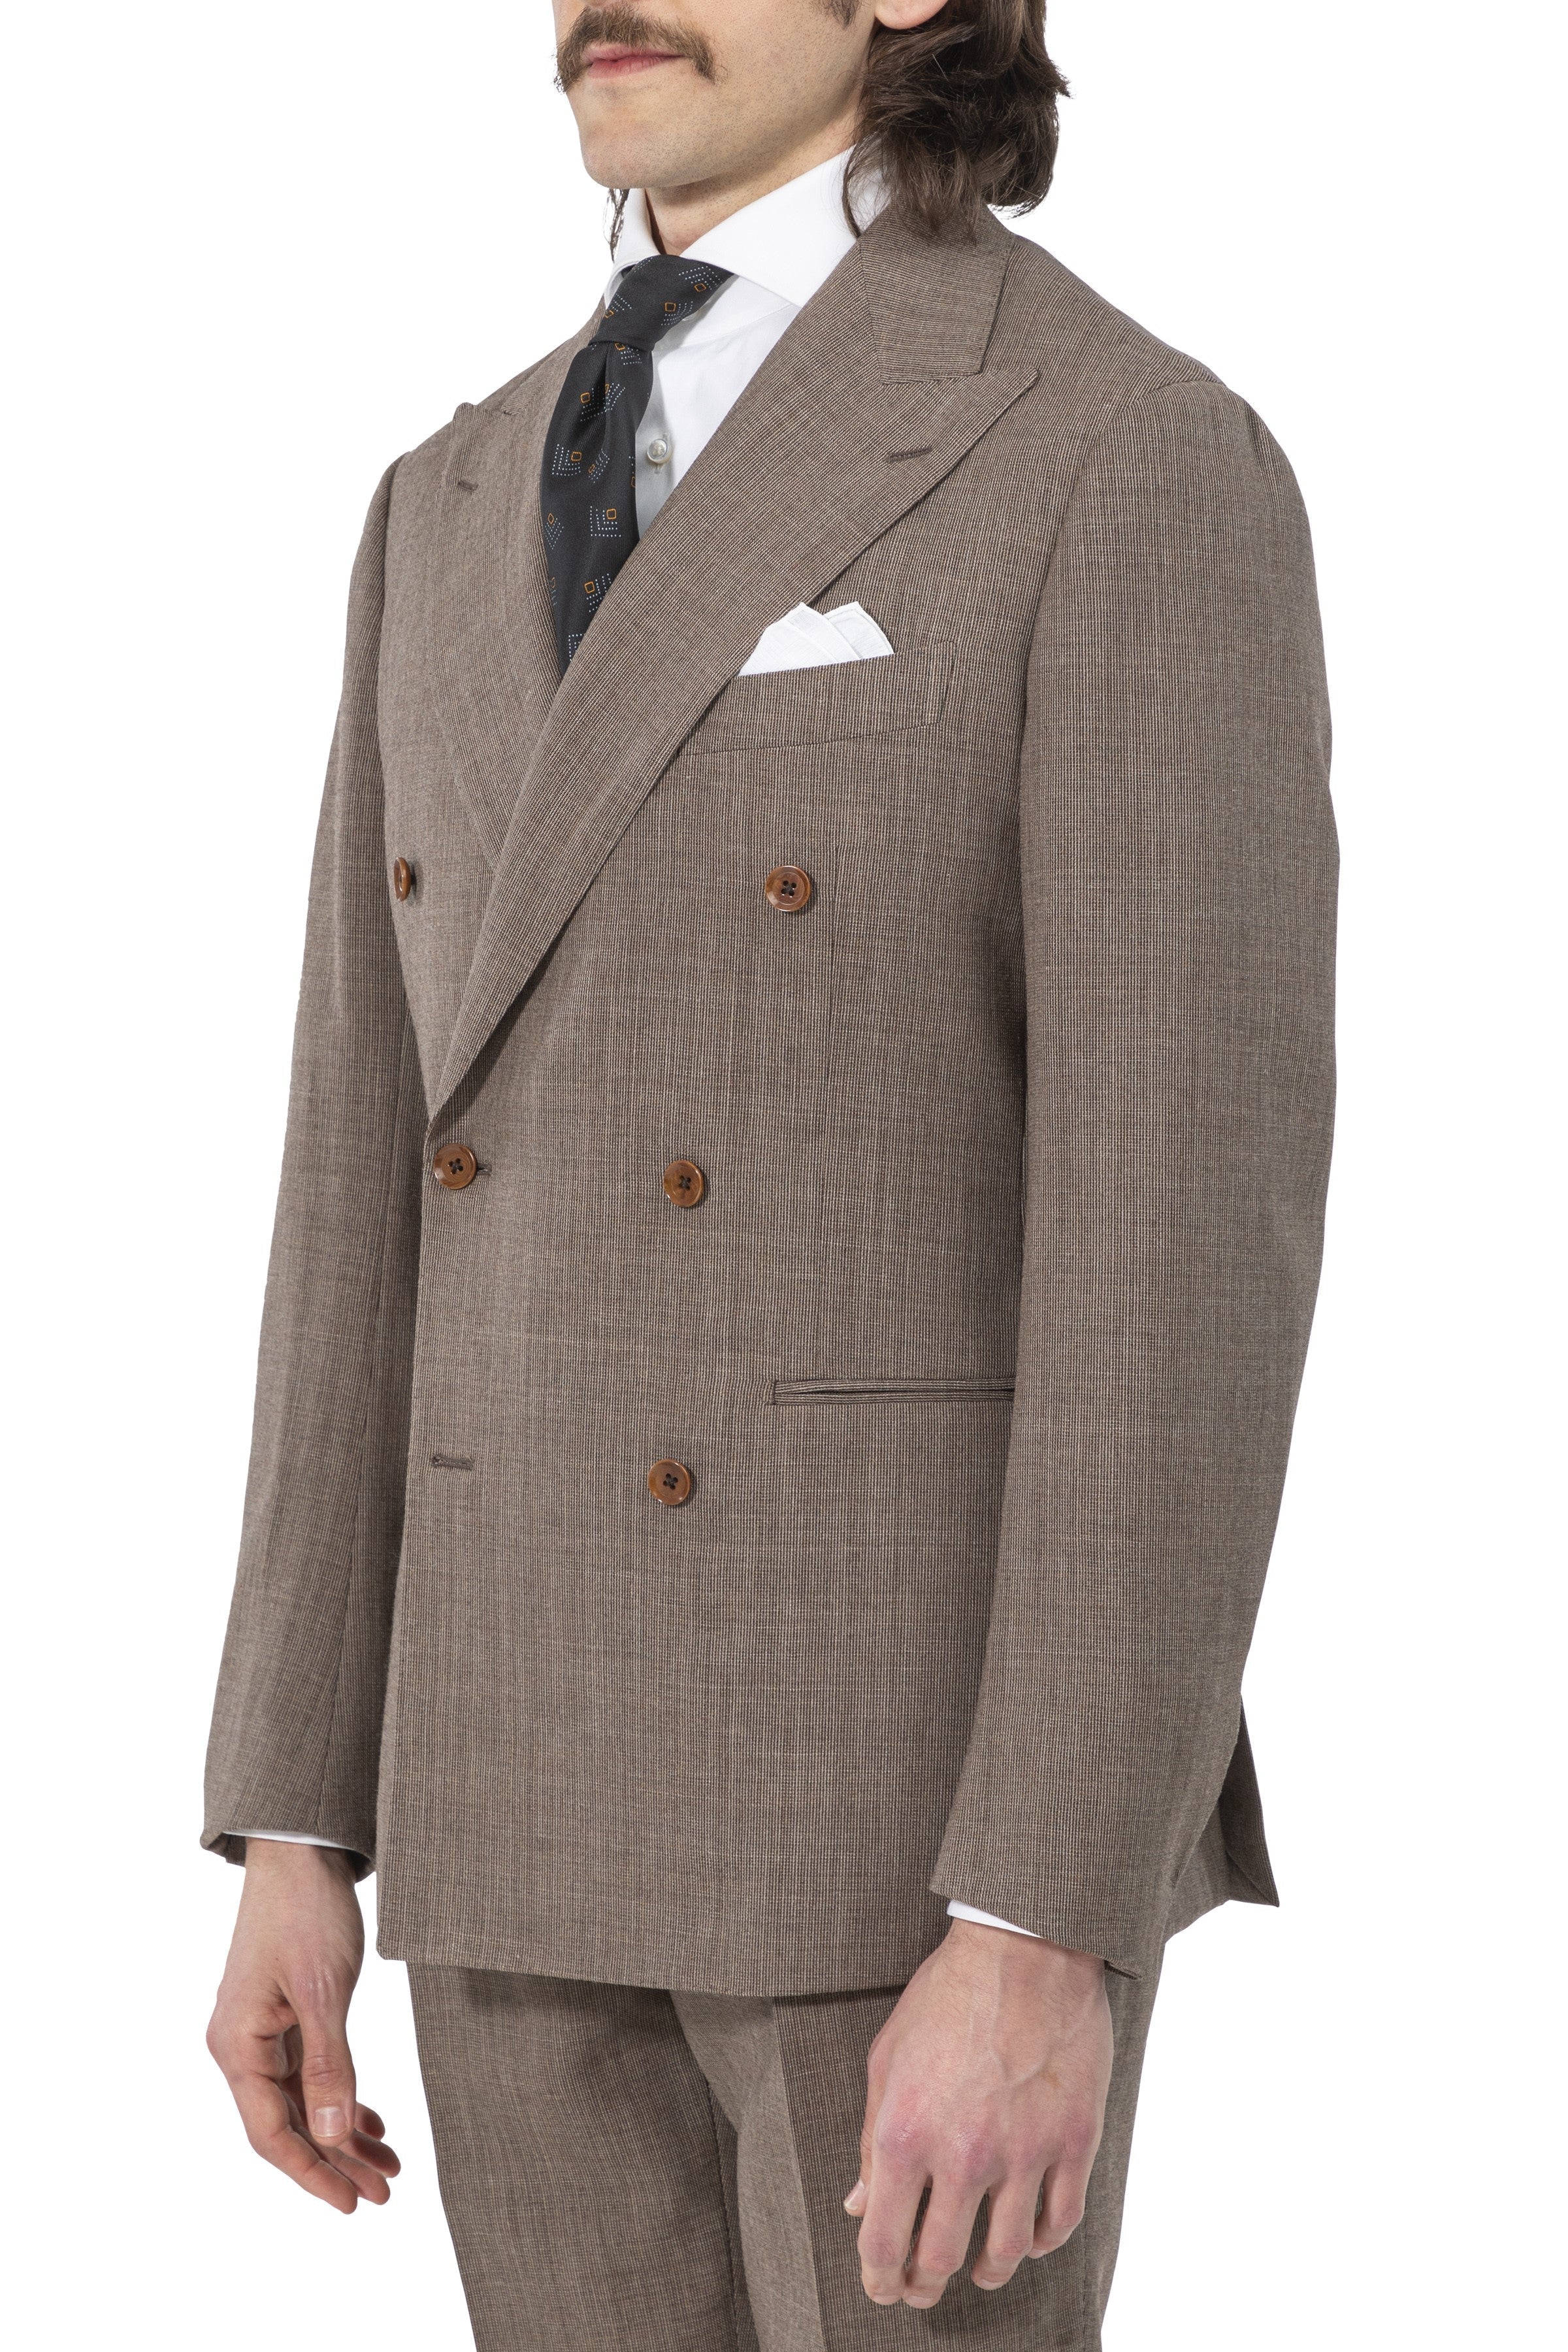 The Armoury by Ring Jacket Model 6B Beige-brown Fox Air Wool Suit